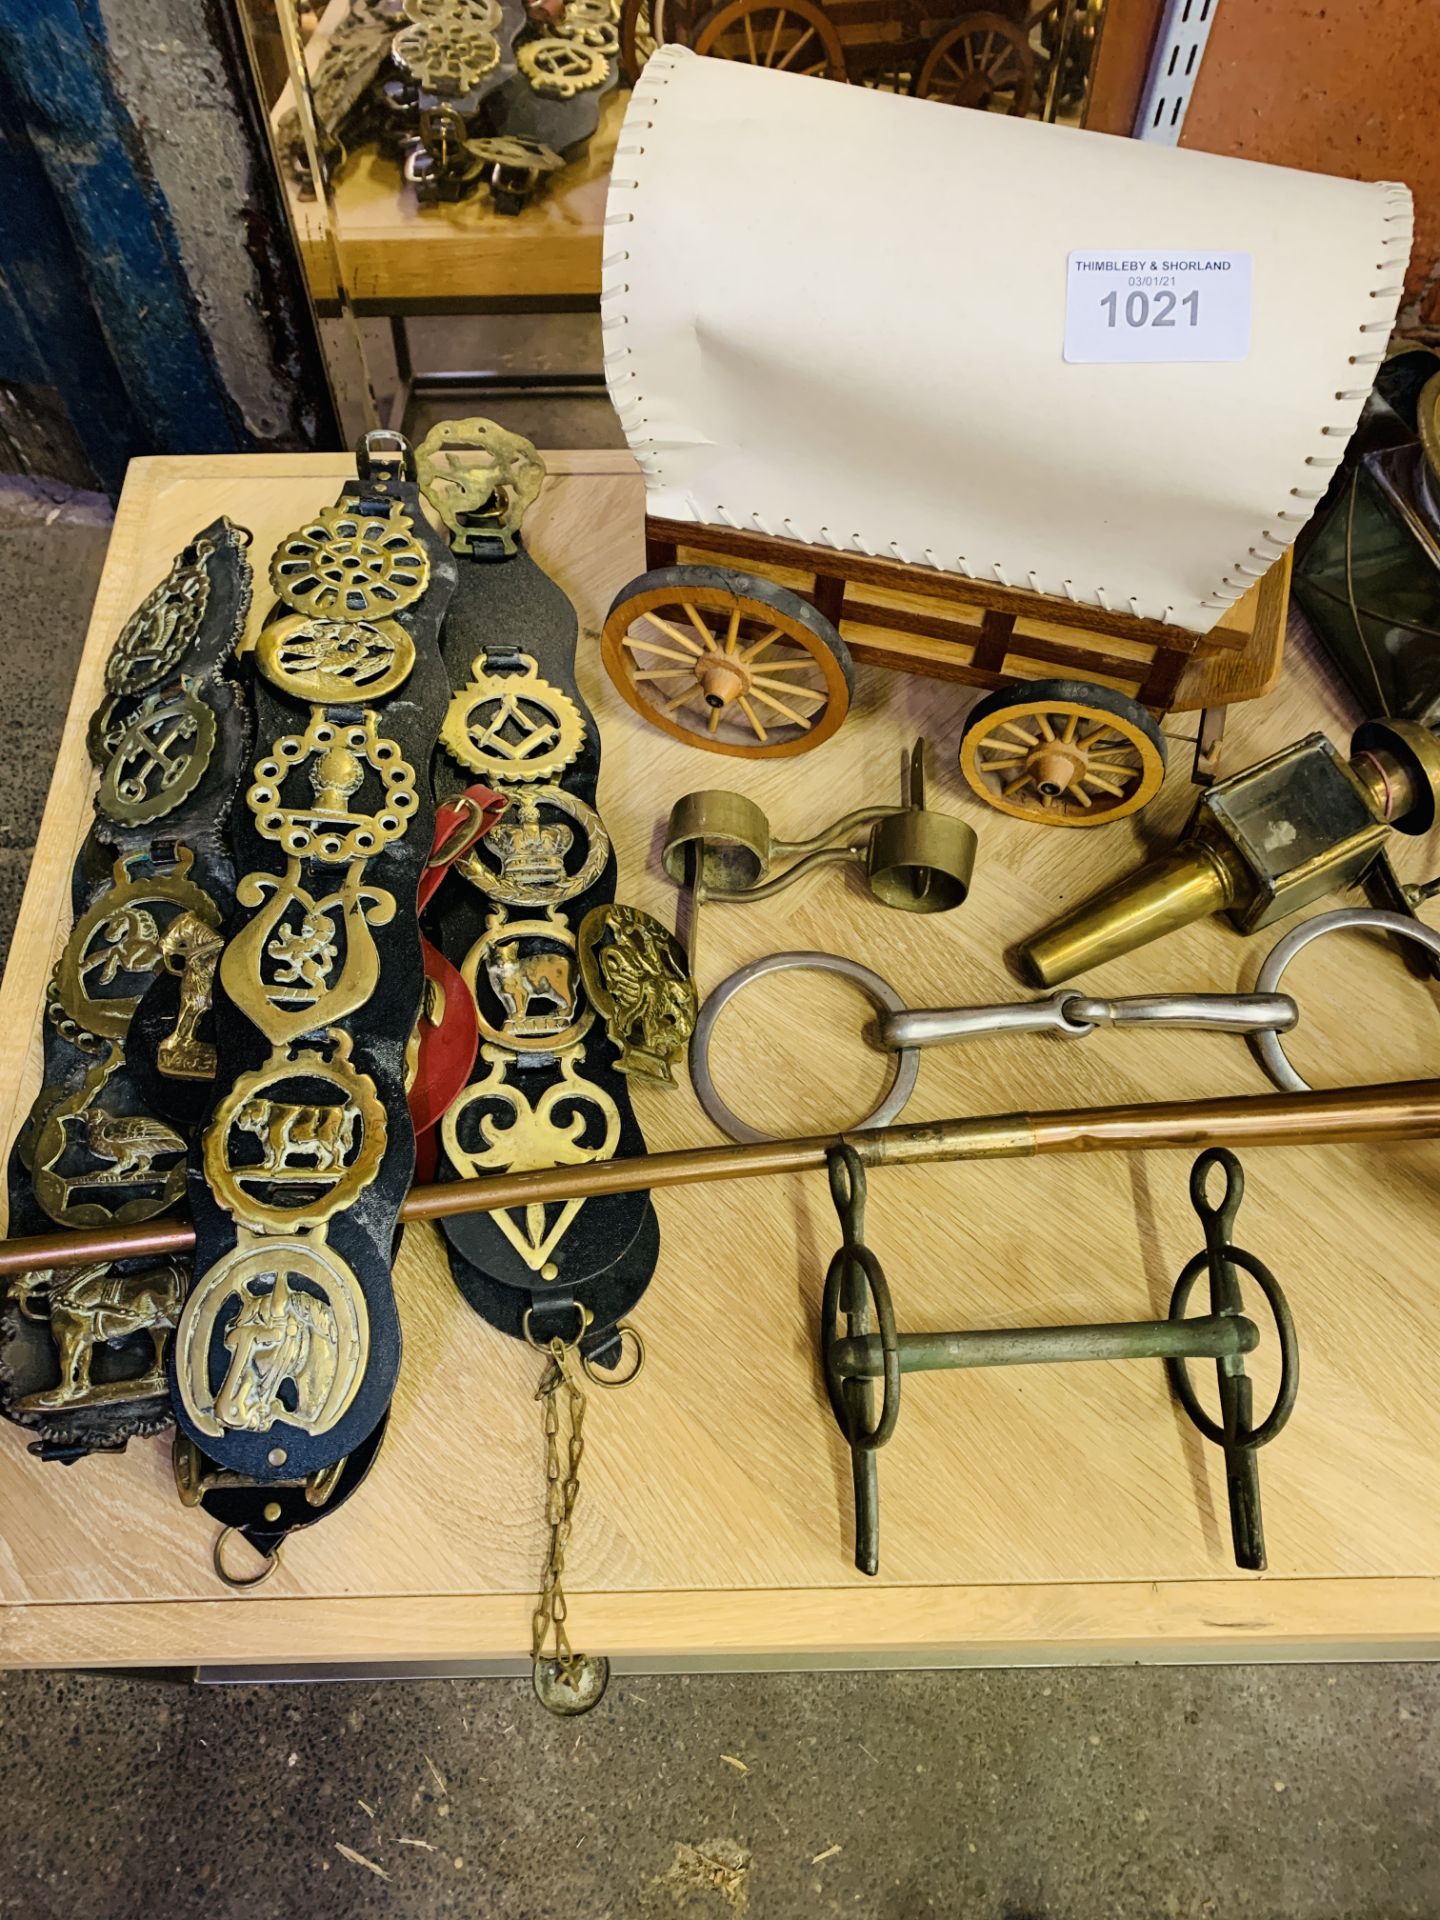 A quantity of mainly horse-related brass items and a blowlamp.